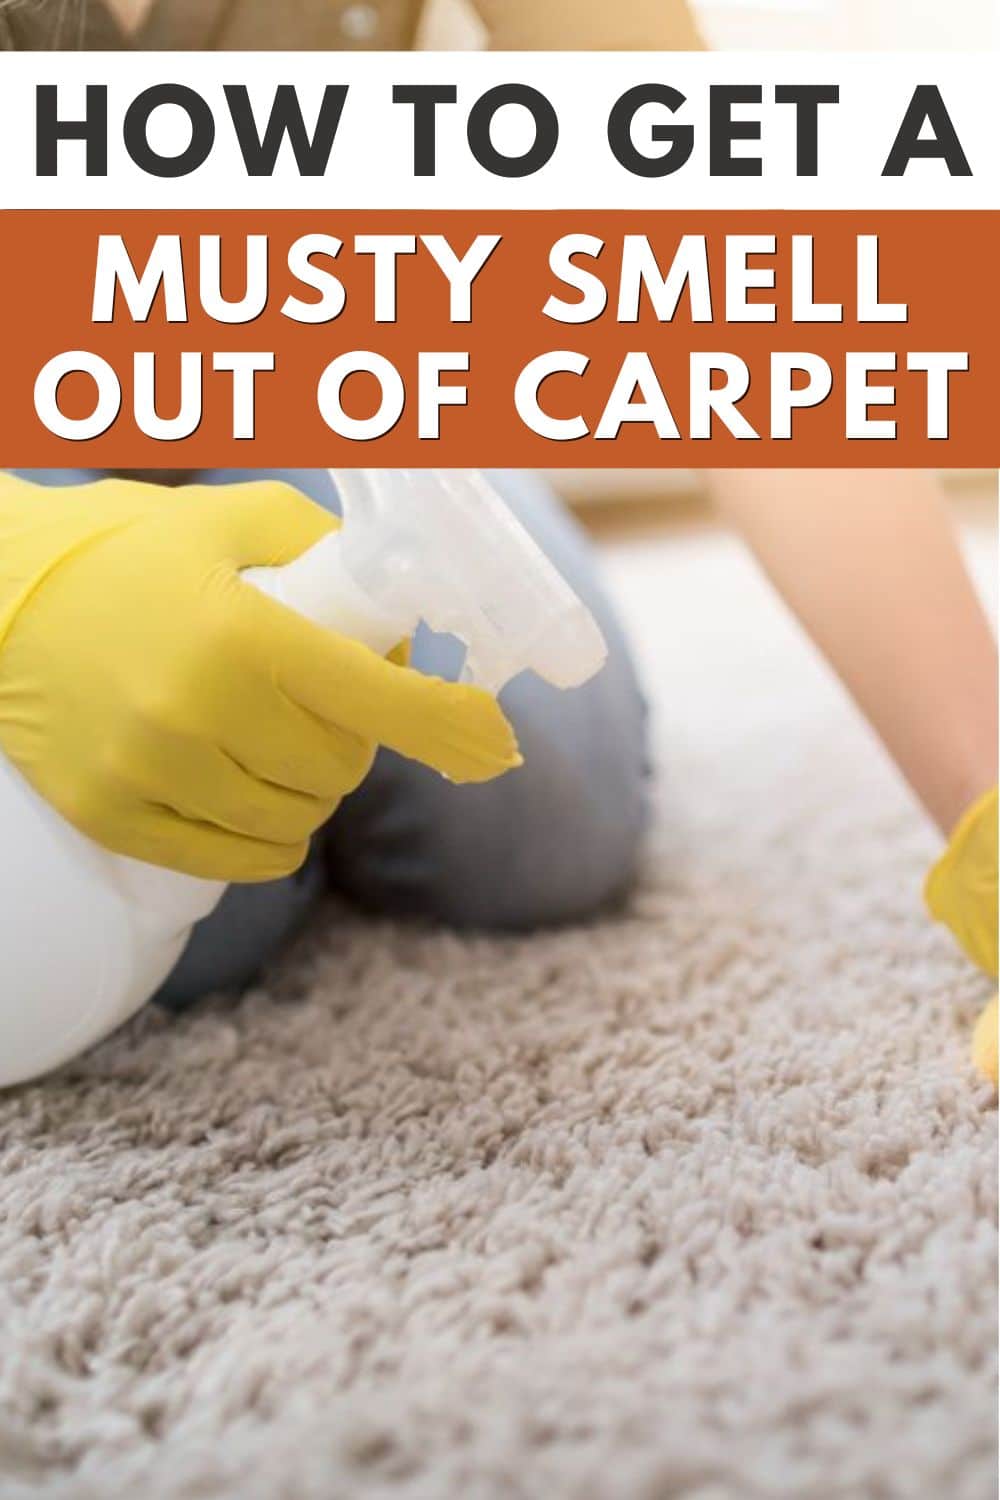 Learn effective methods to eliminate a persistent musty odor from your carpet.